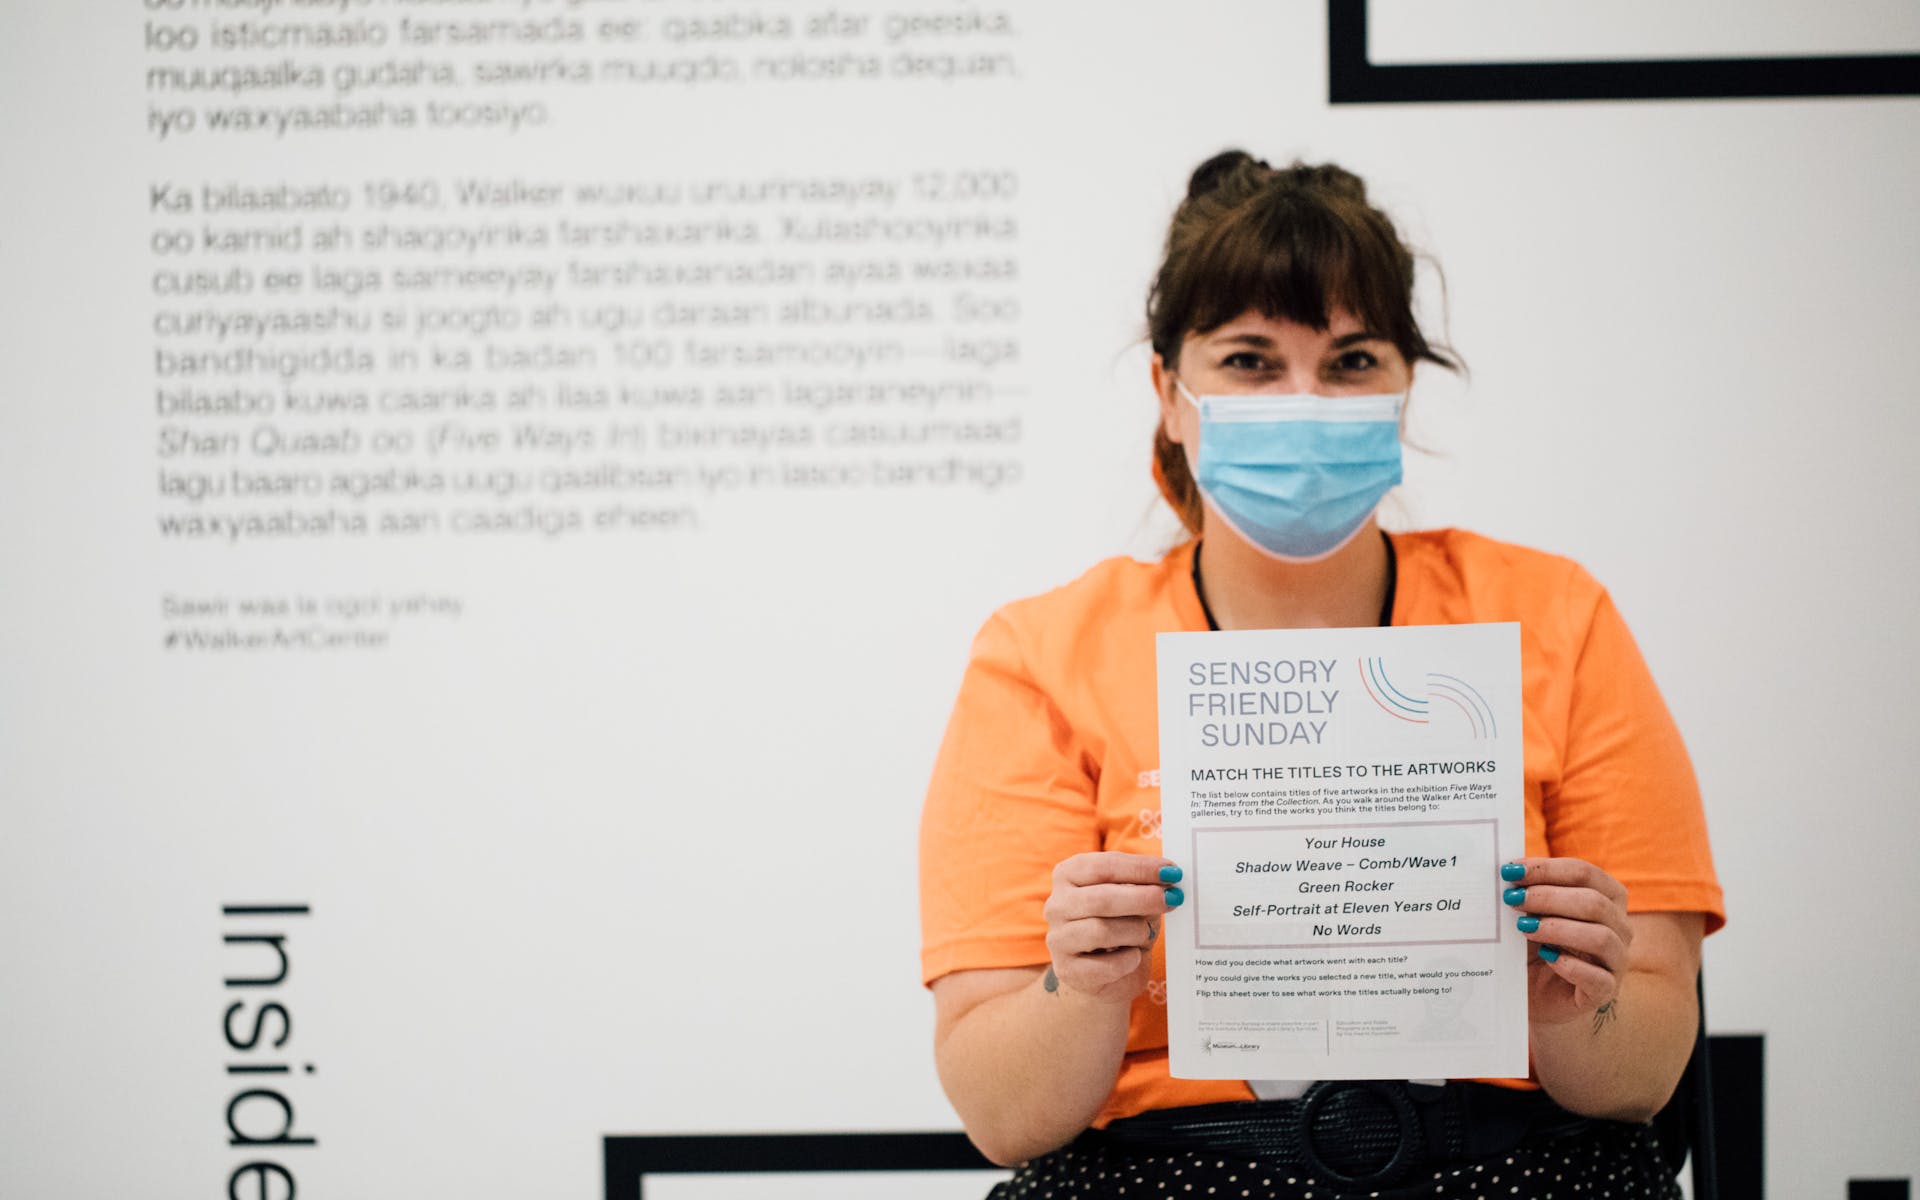 An adult wearing a face mask holds up a sheet with instructions at the viewer.